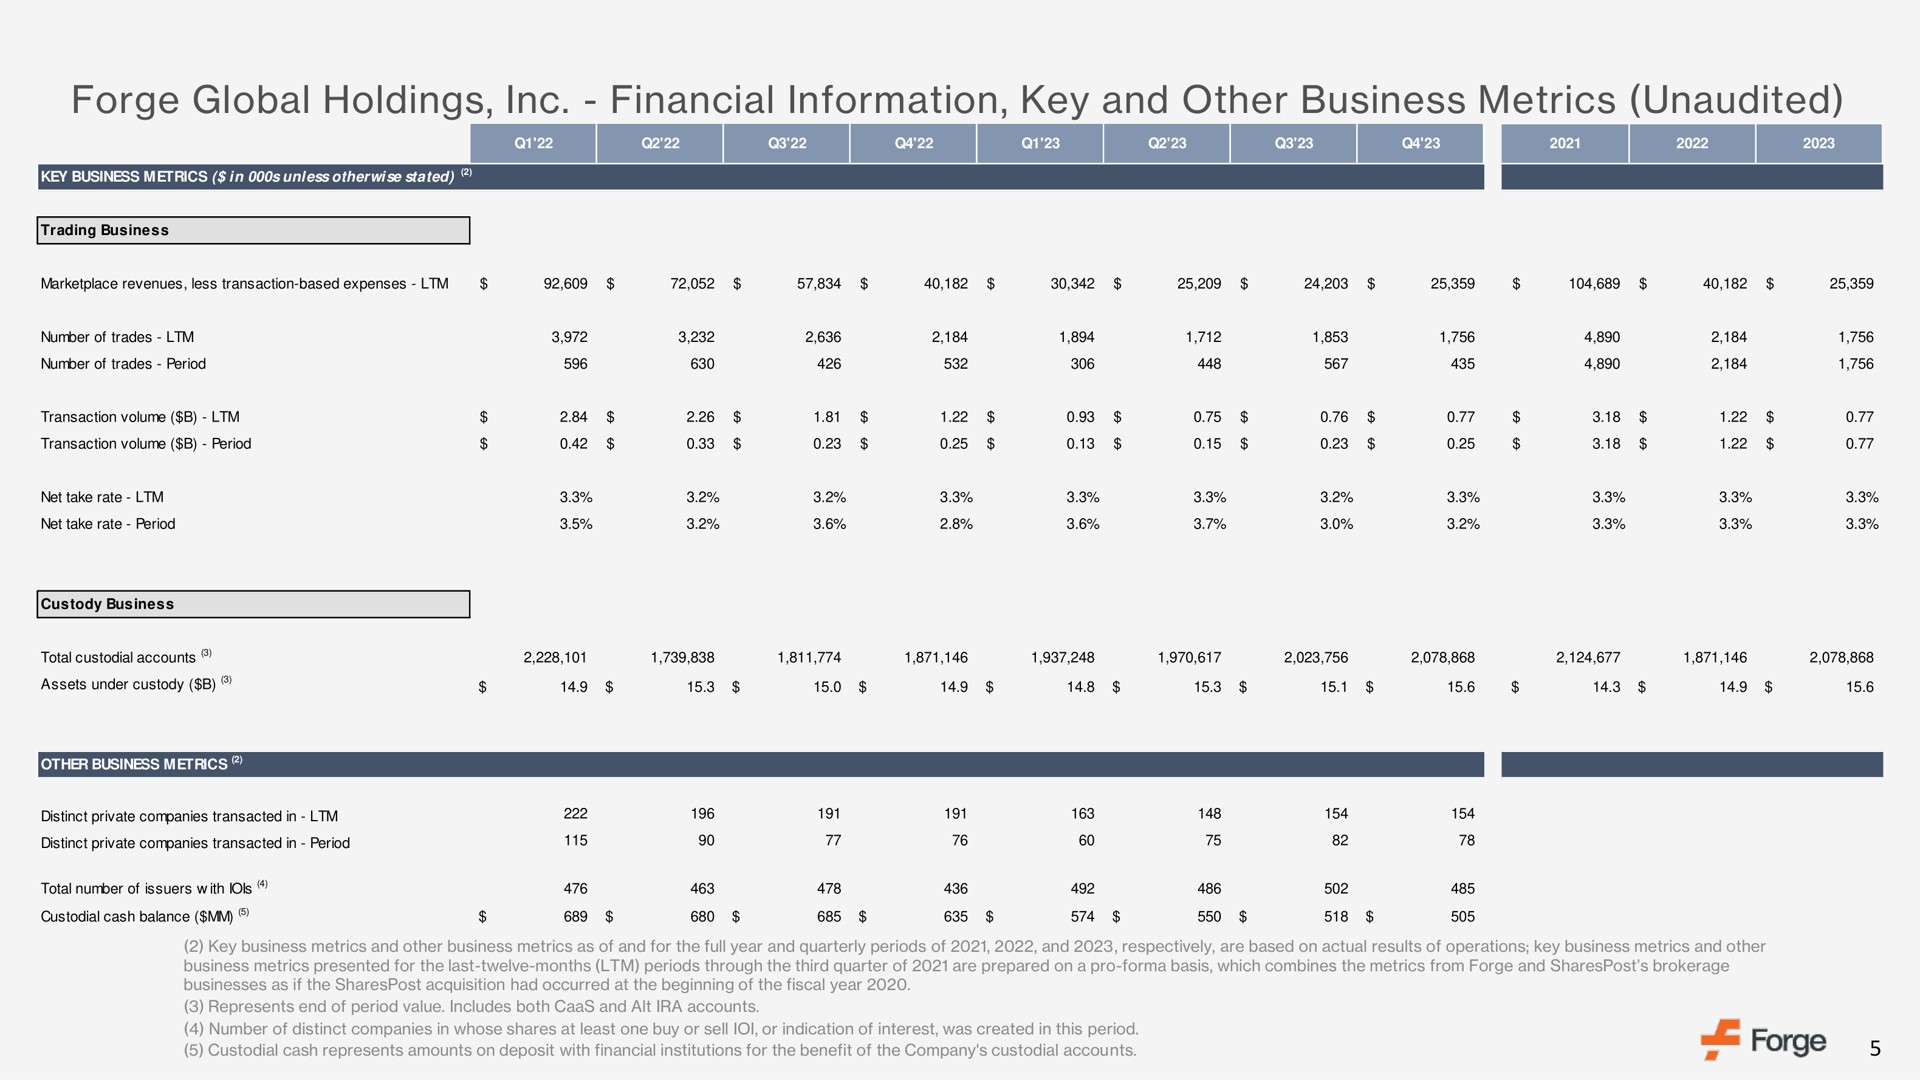 forge global holdings financial information key and other business metrics unaudited | Forge